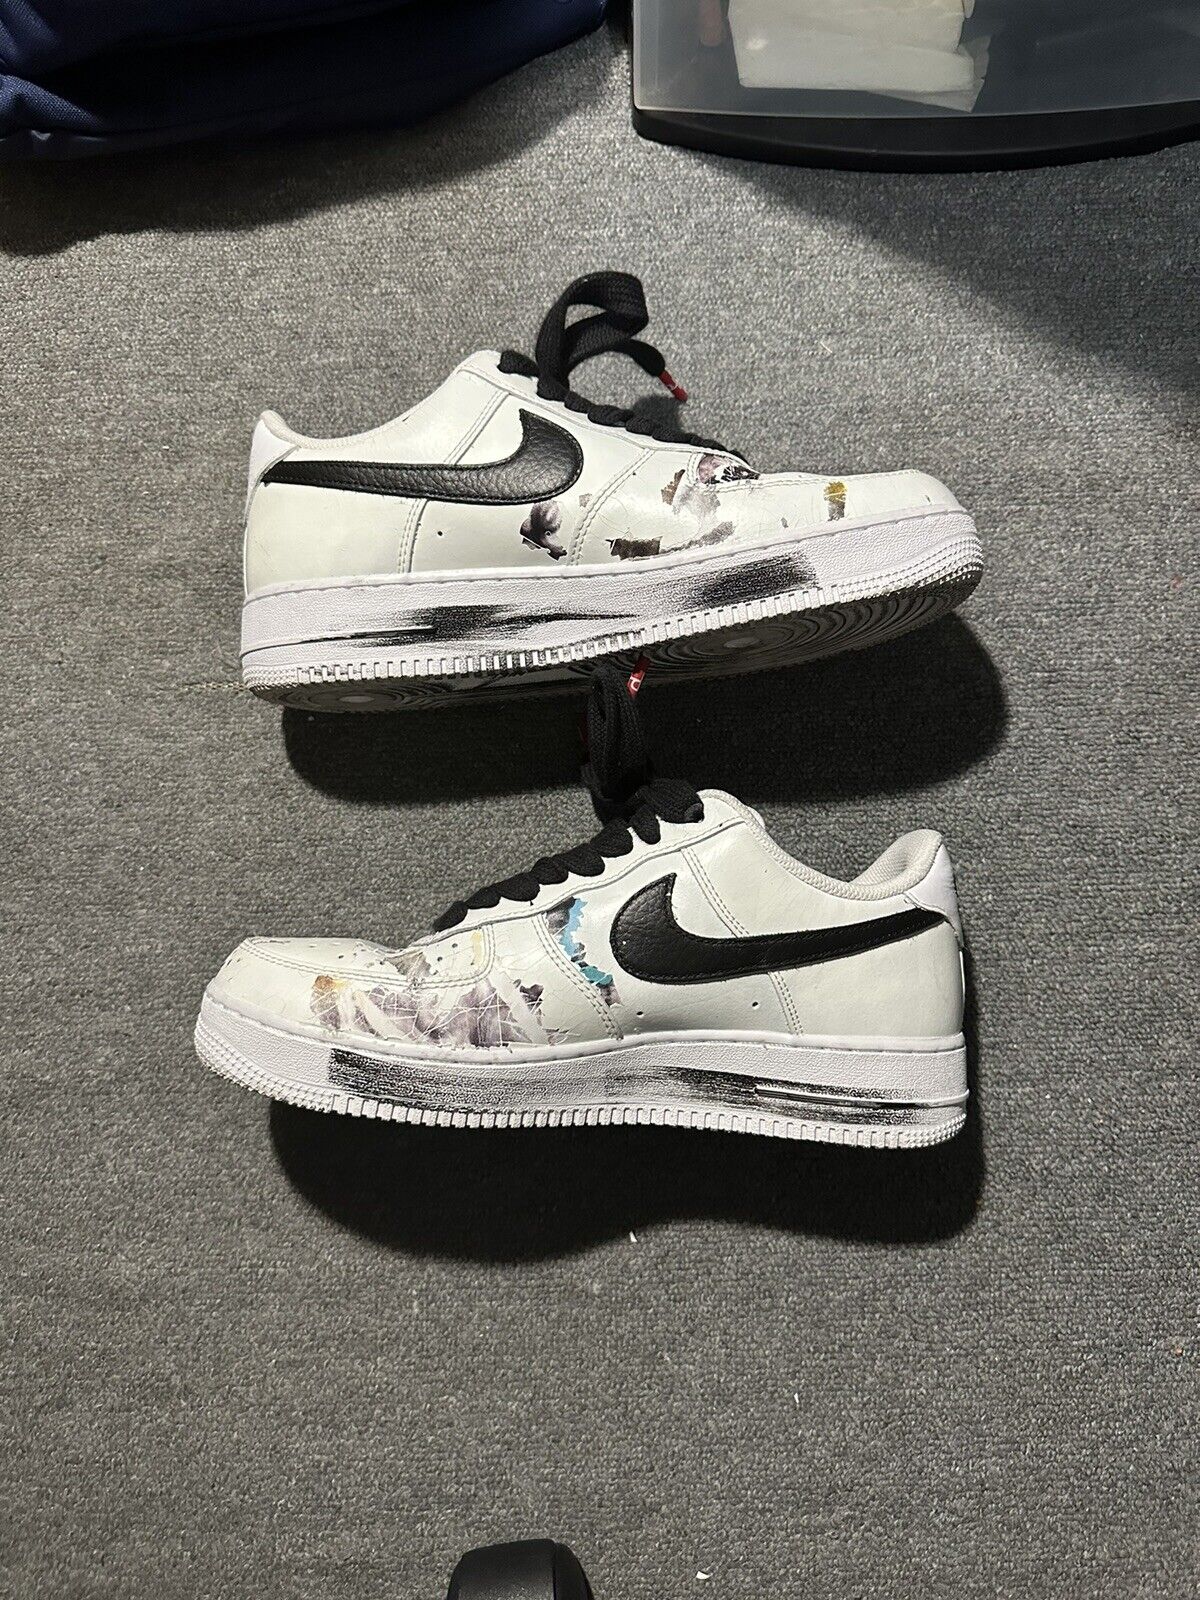 Size 9.5 - Used Nike Air Force 1 Low G-Dragon Peaceminusone Para-Noise 2.0